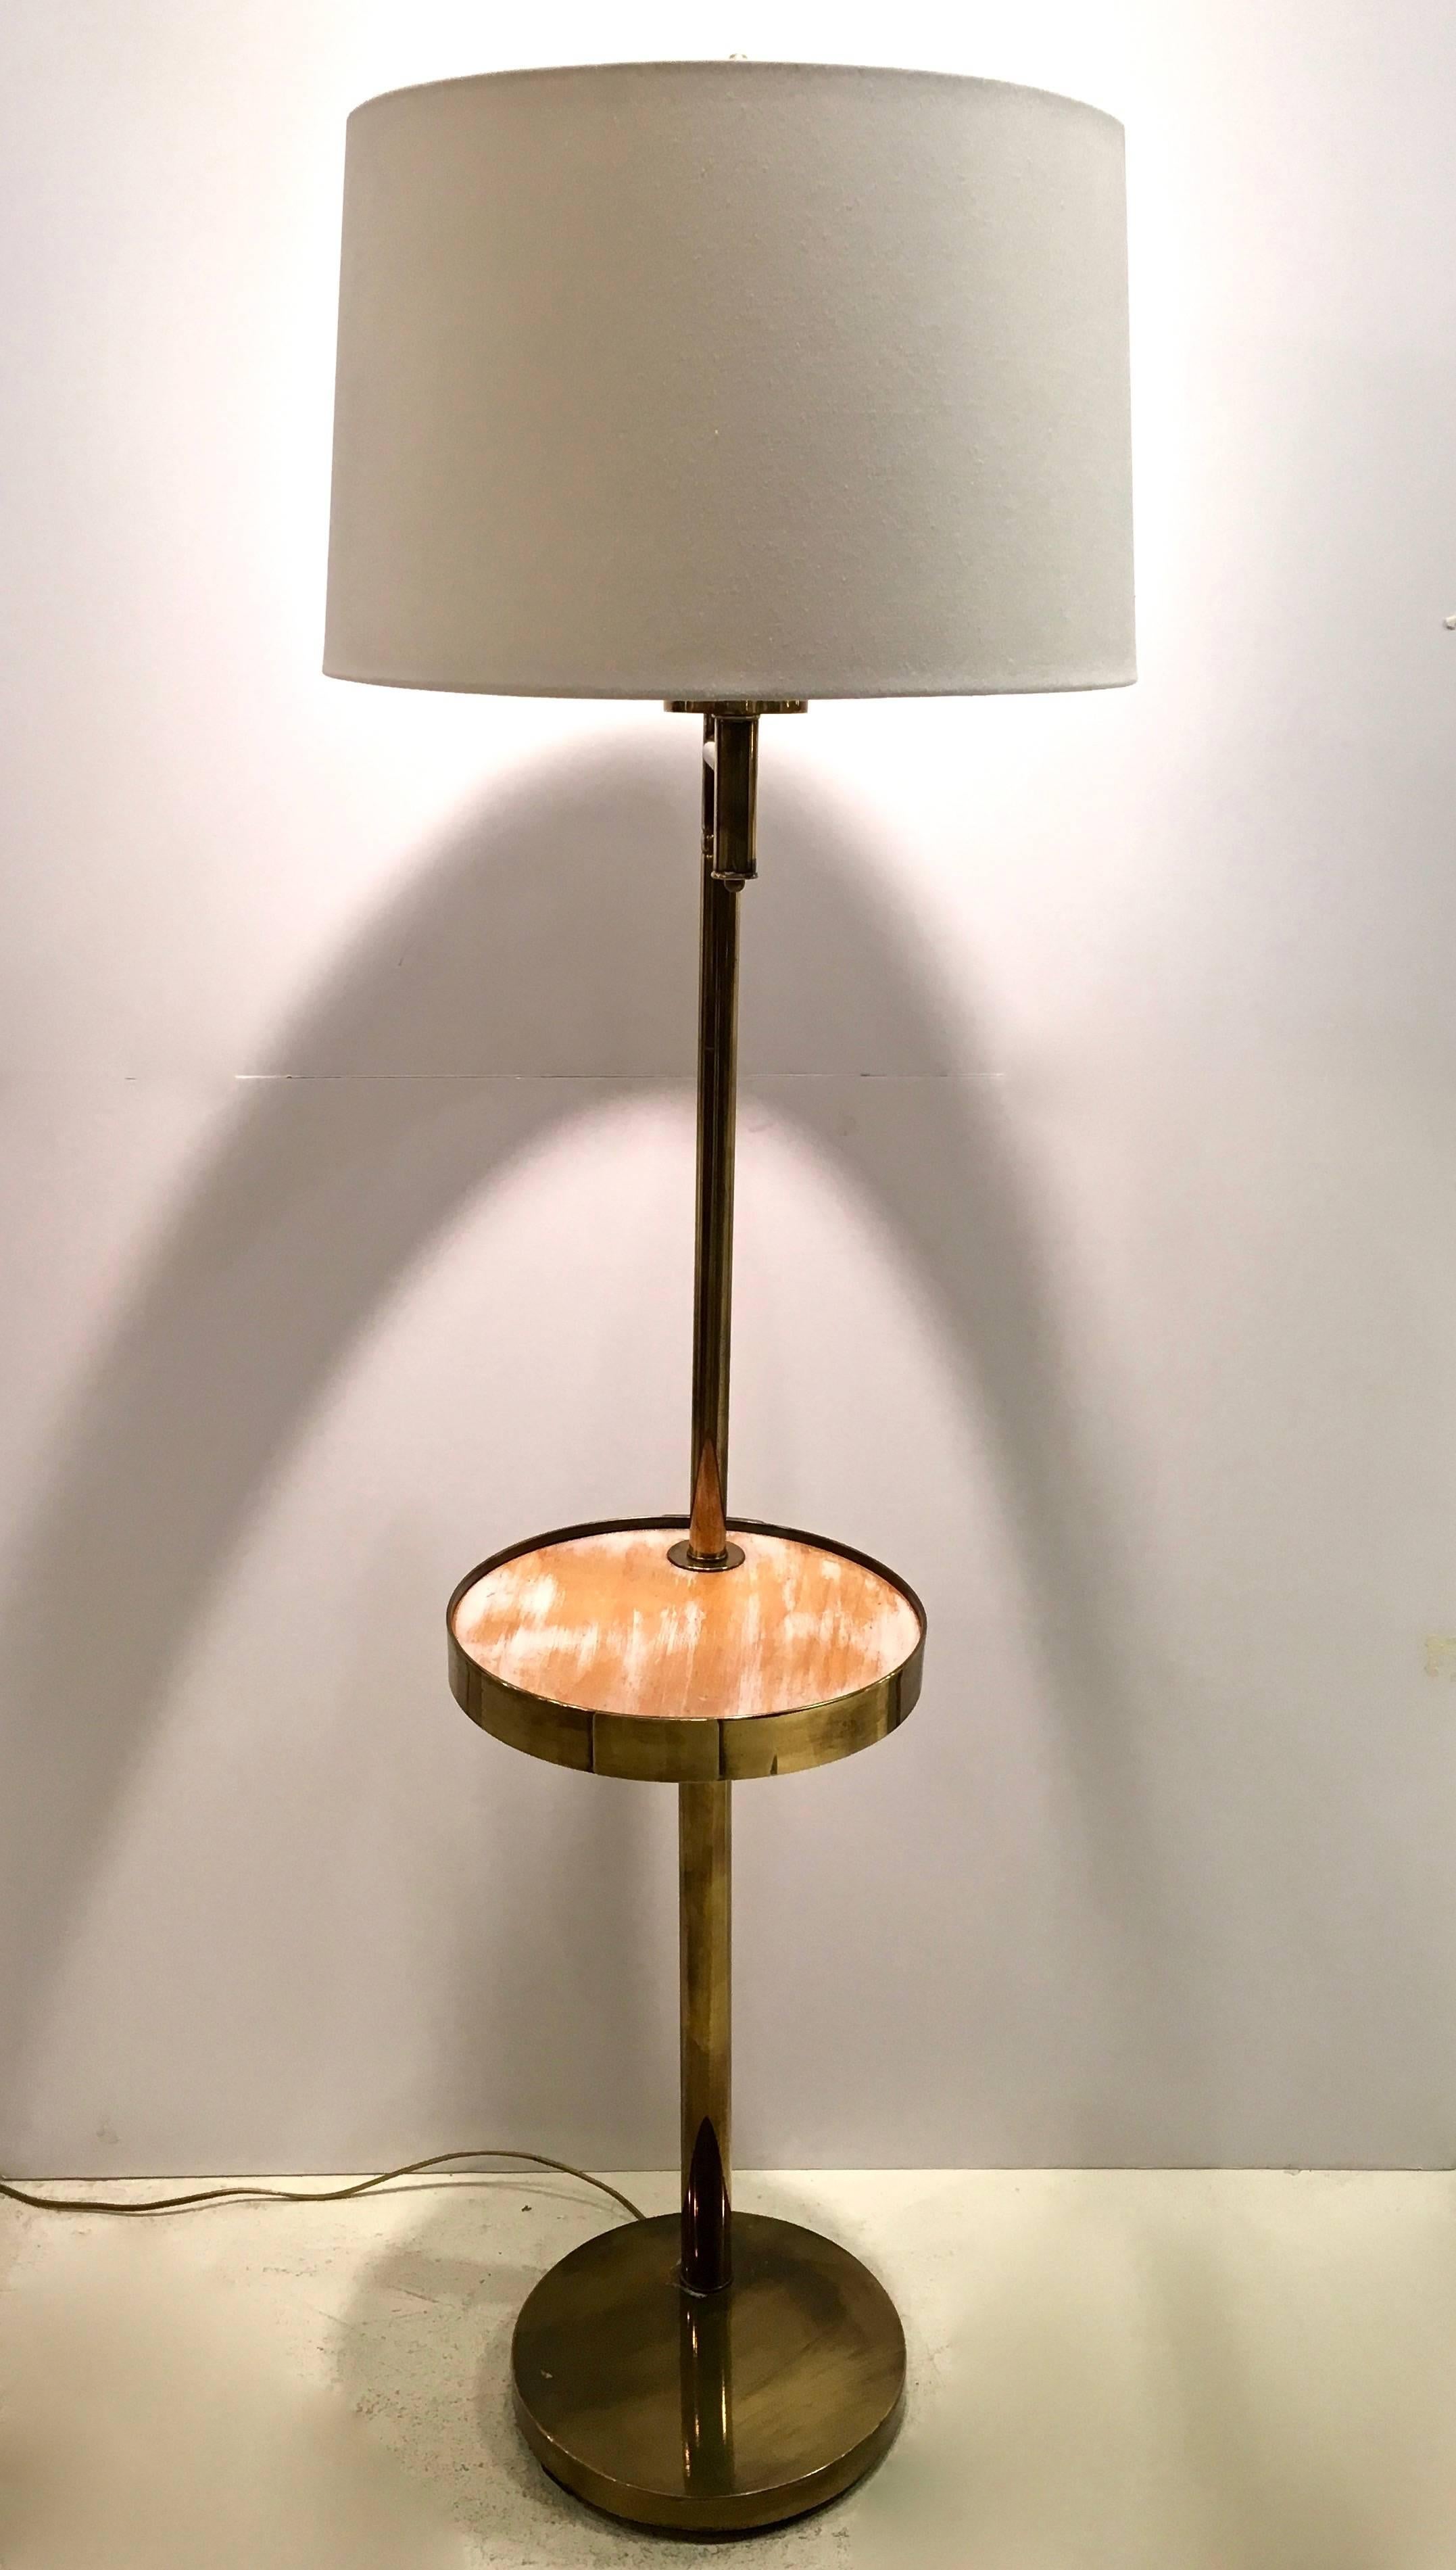 Beautifully and substantial patinated brass standing floor lamp. Swivel tray has a cerused wood tray table for drinks. Newly rewired and drum shade included.